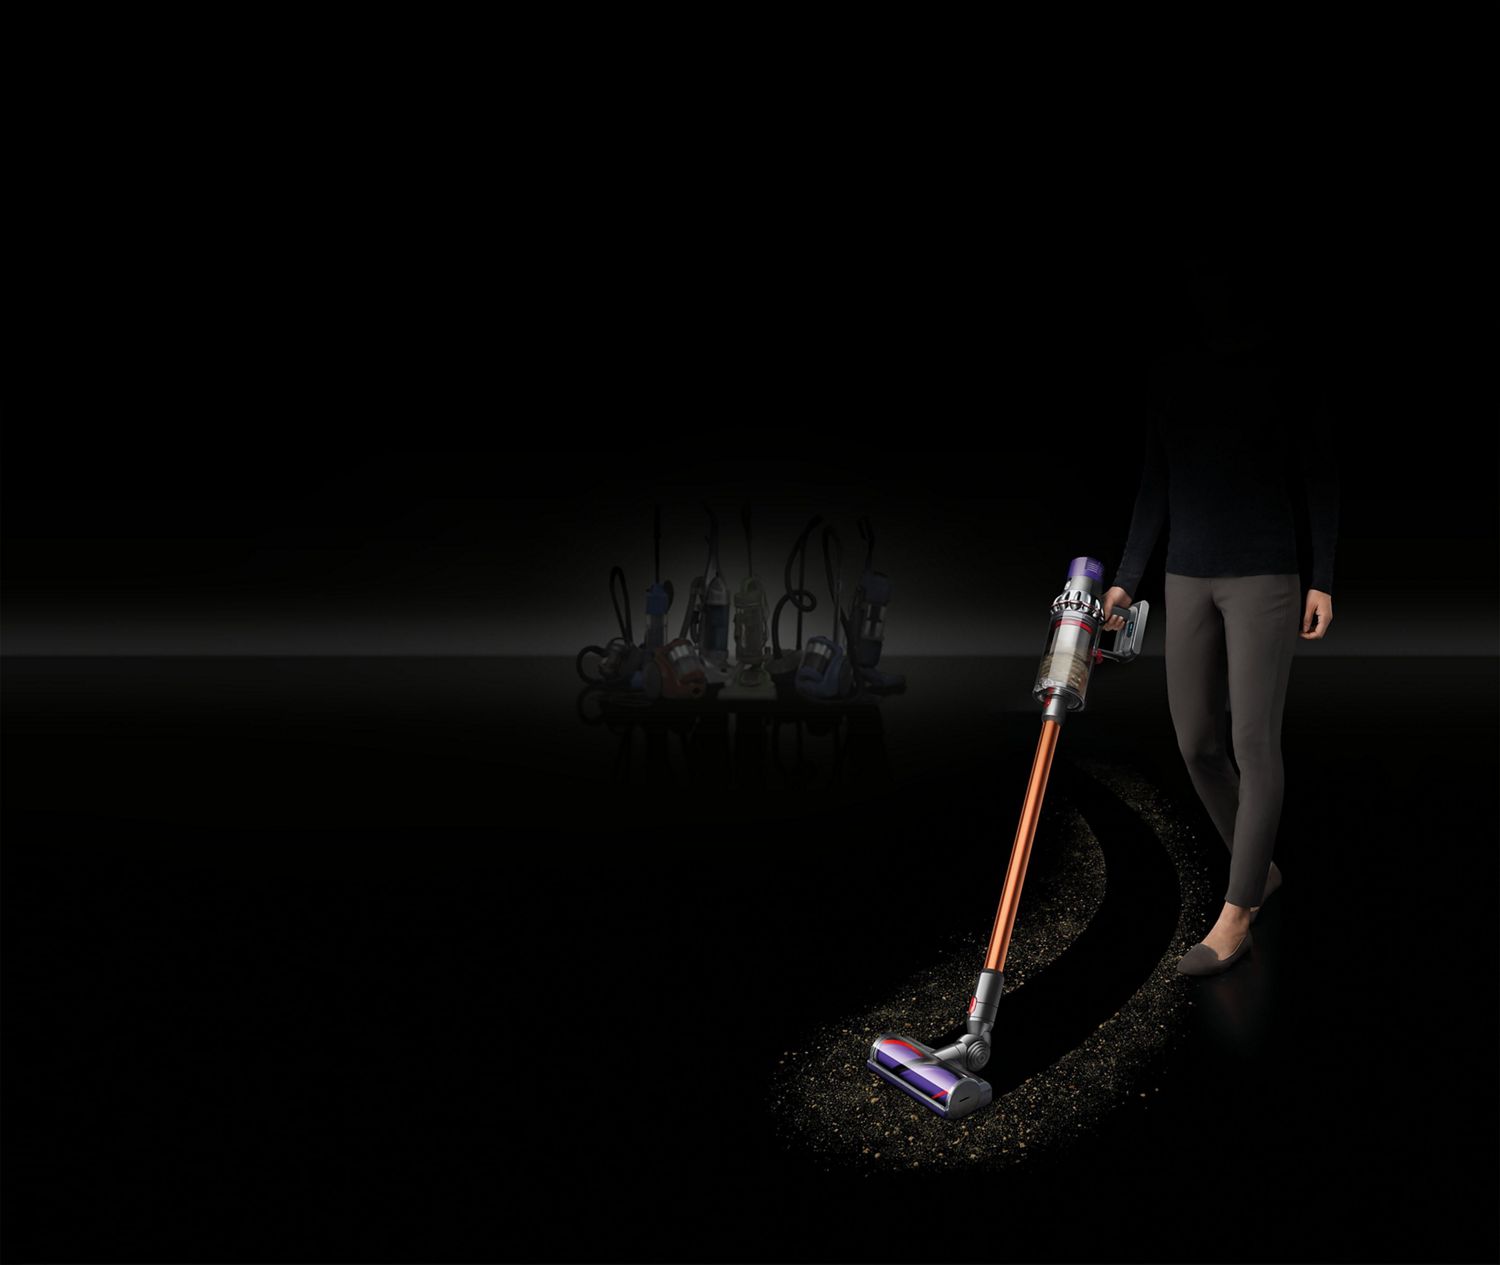 Dyson Cyclone V10™ cordless vacuum cleaner: Overview | Dyson